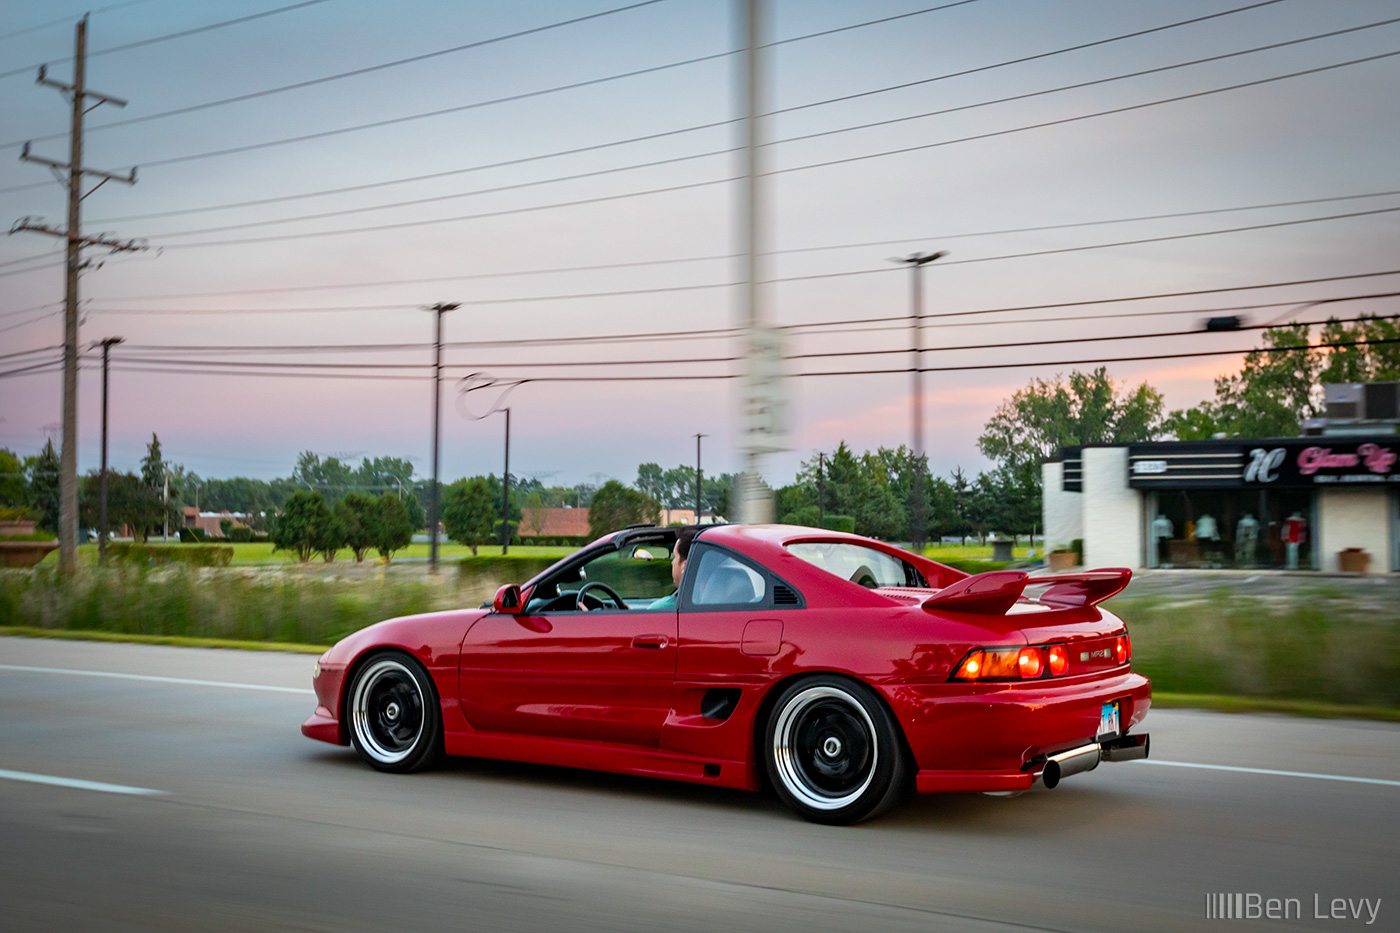 Rolling Shot of a Red Toyota MR2